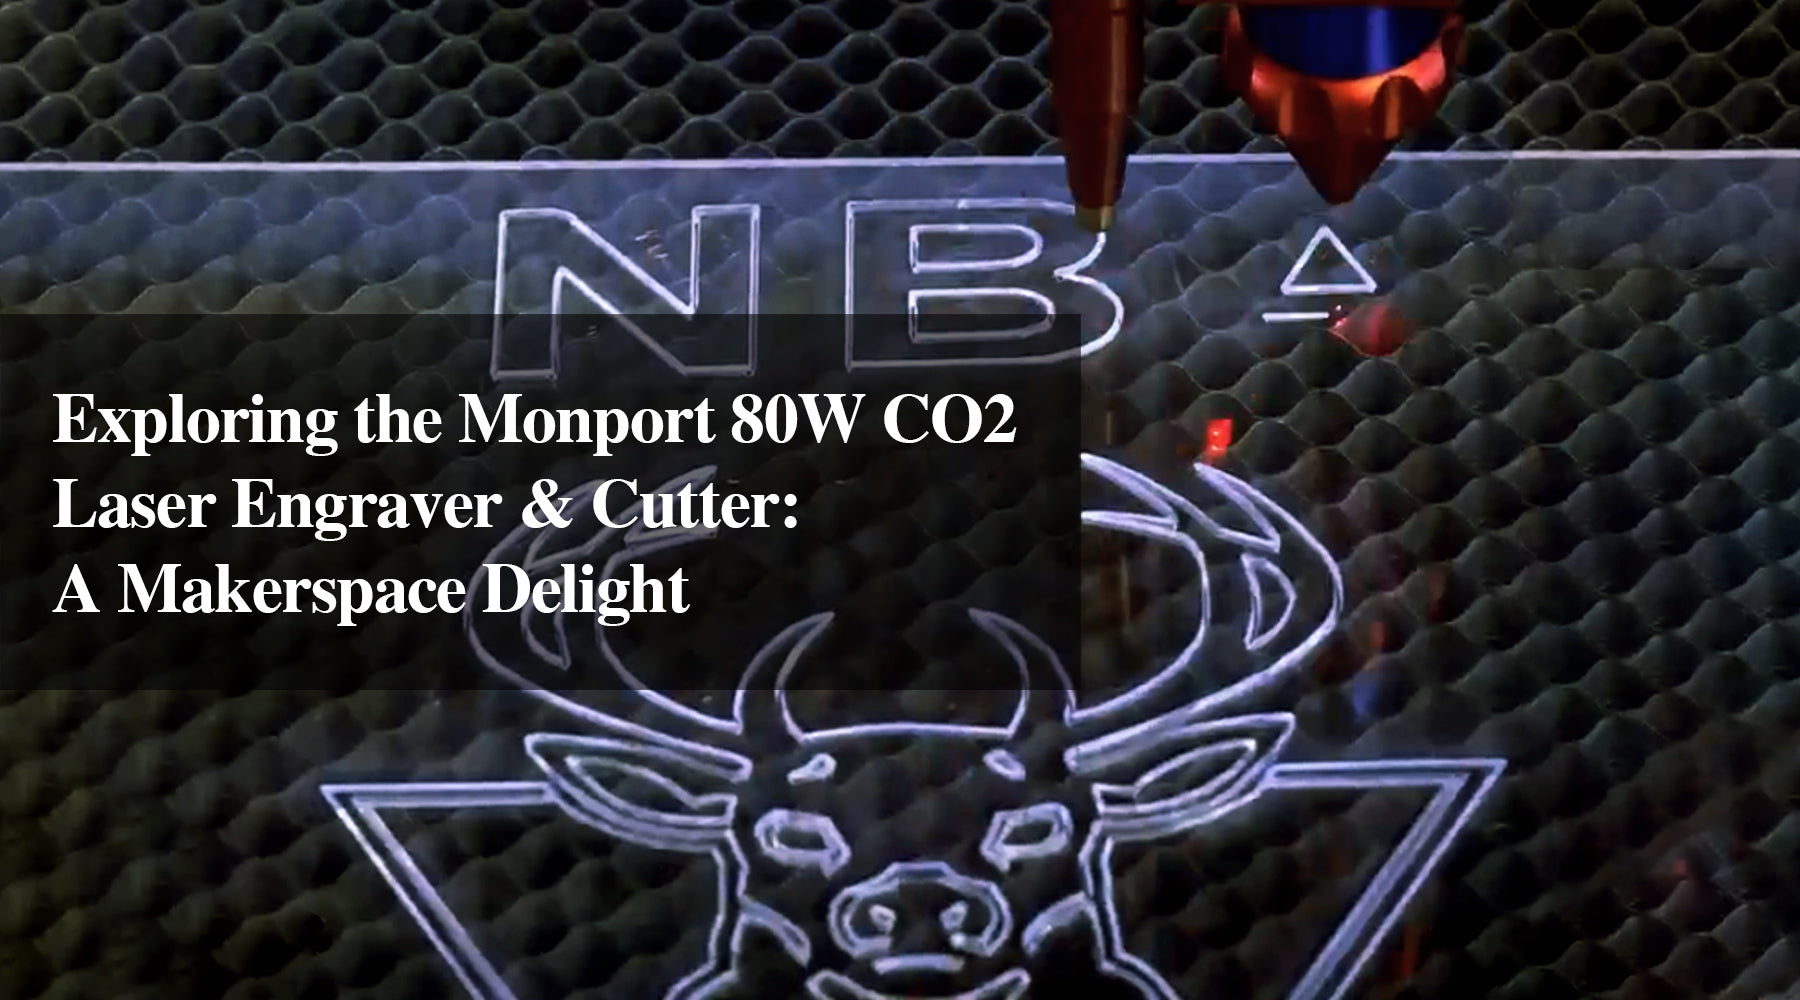 Exploring the Monport 80W CO2 Laser Engraver & Cutter: A Makerspace Delight